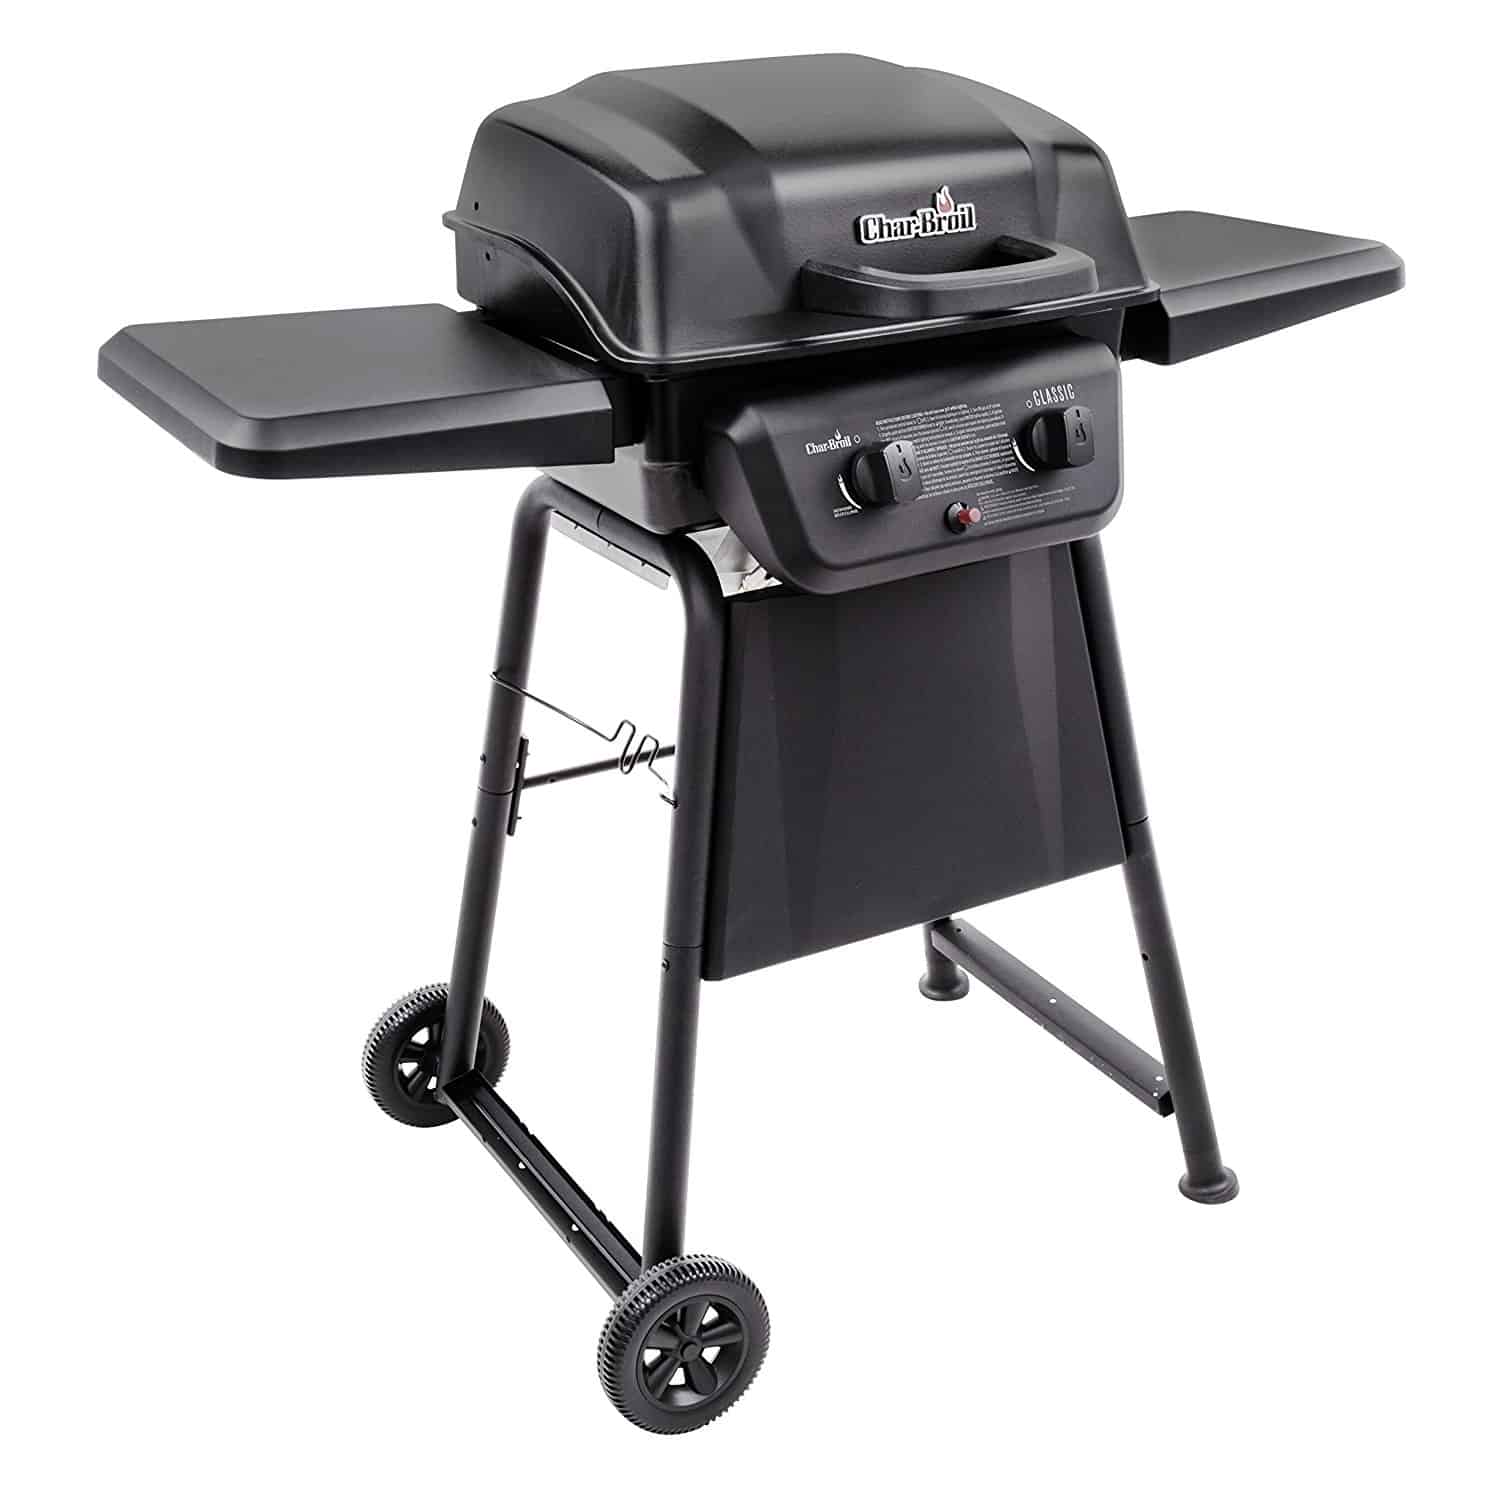 Best Gas Grill Under $100 (Top 5 Best Gas Grill or BBQ Grill)